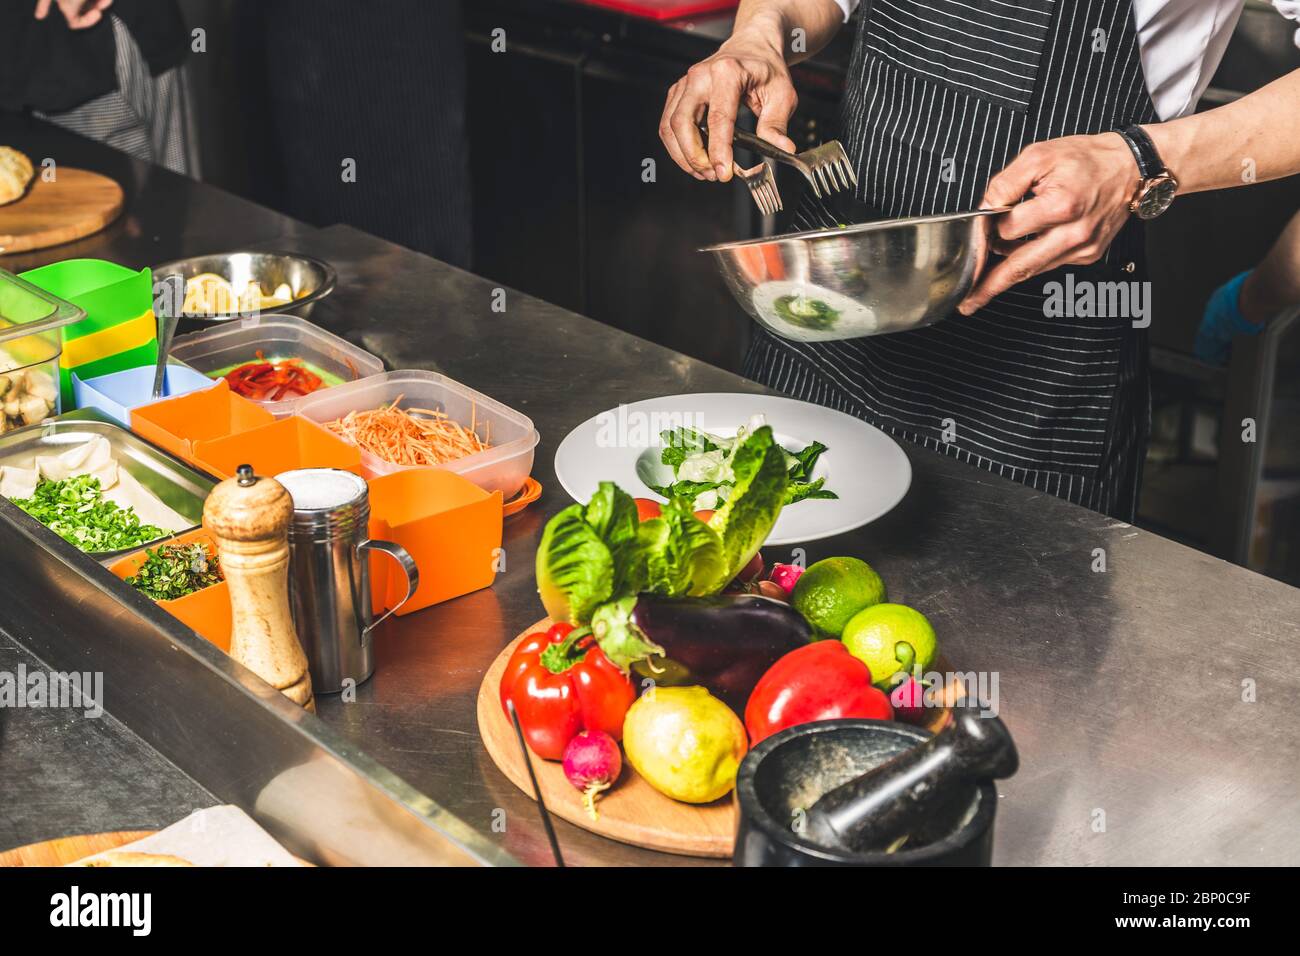 Professional chef cooking in the kitchen restaurant at the hotel, preparing dinner. A cook in an apron makes a salad of vegetables and pizza. Stock Photo